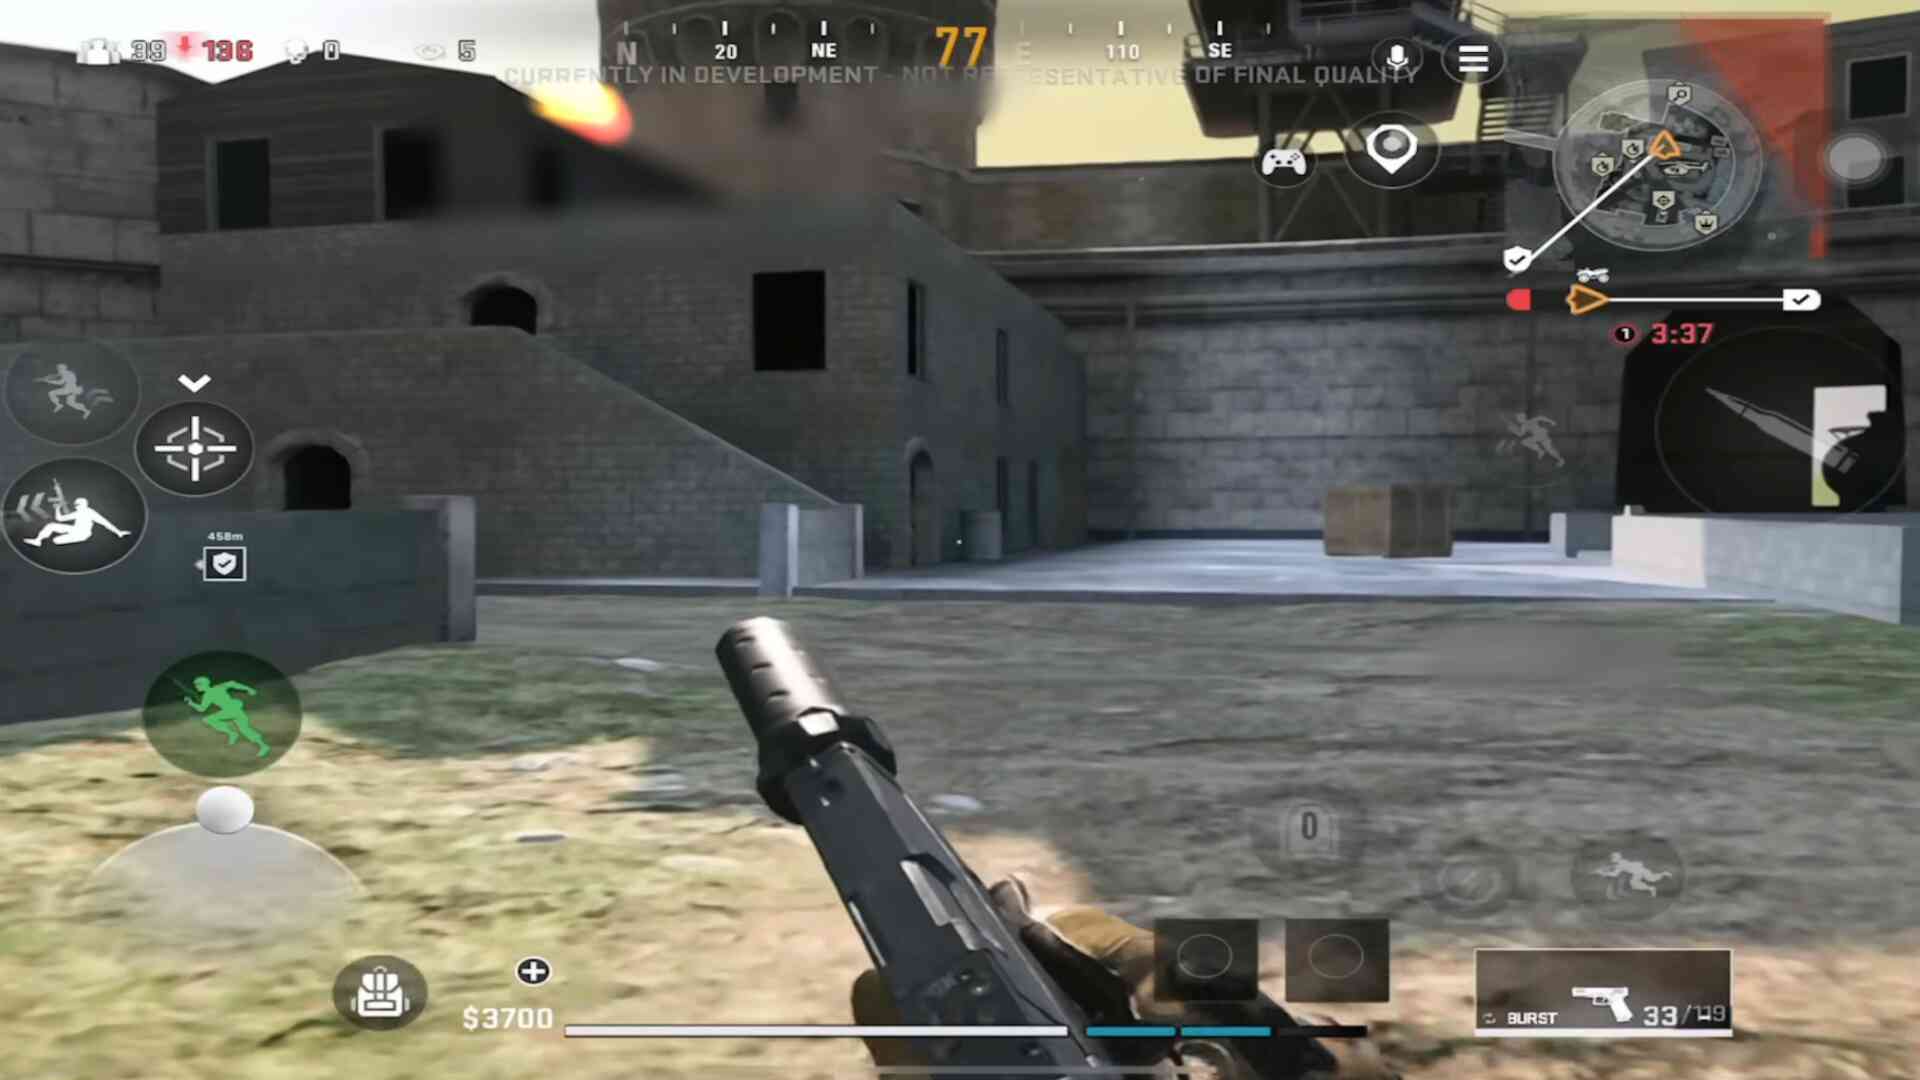 Download Call of Duty Warzone Mobile on Android & iOS